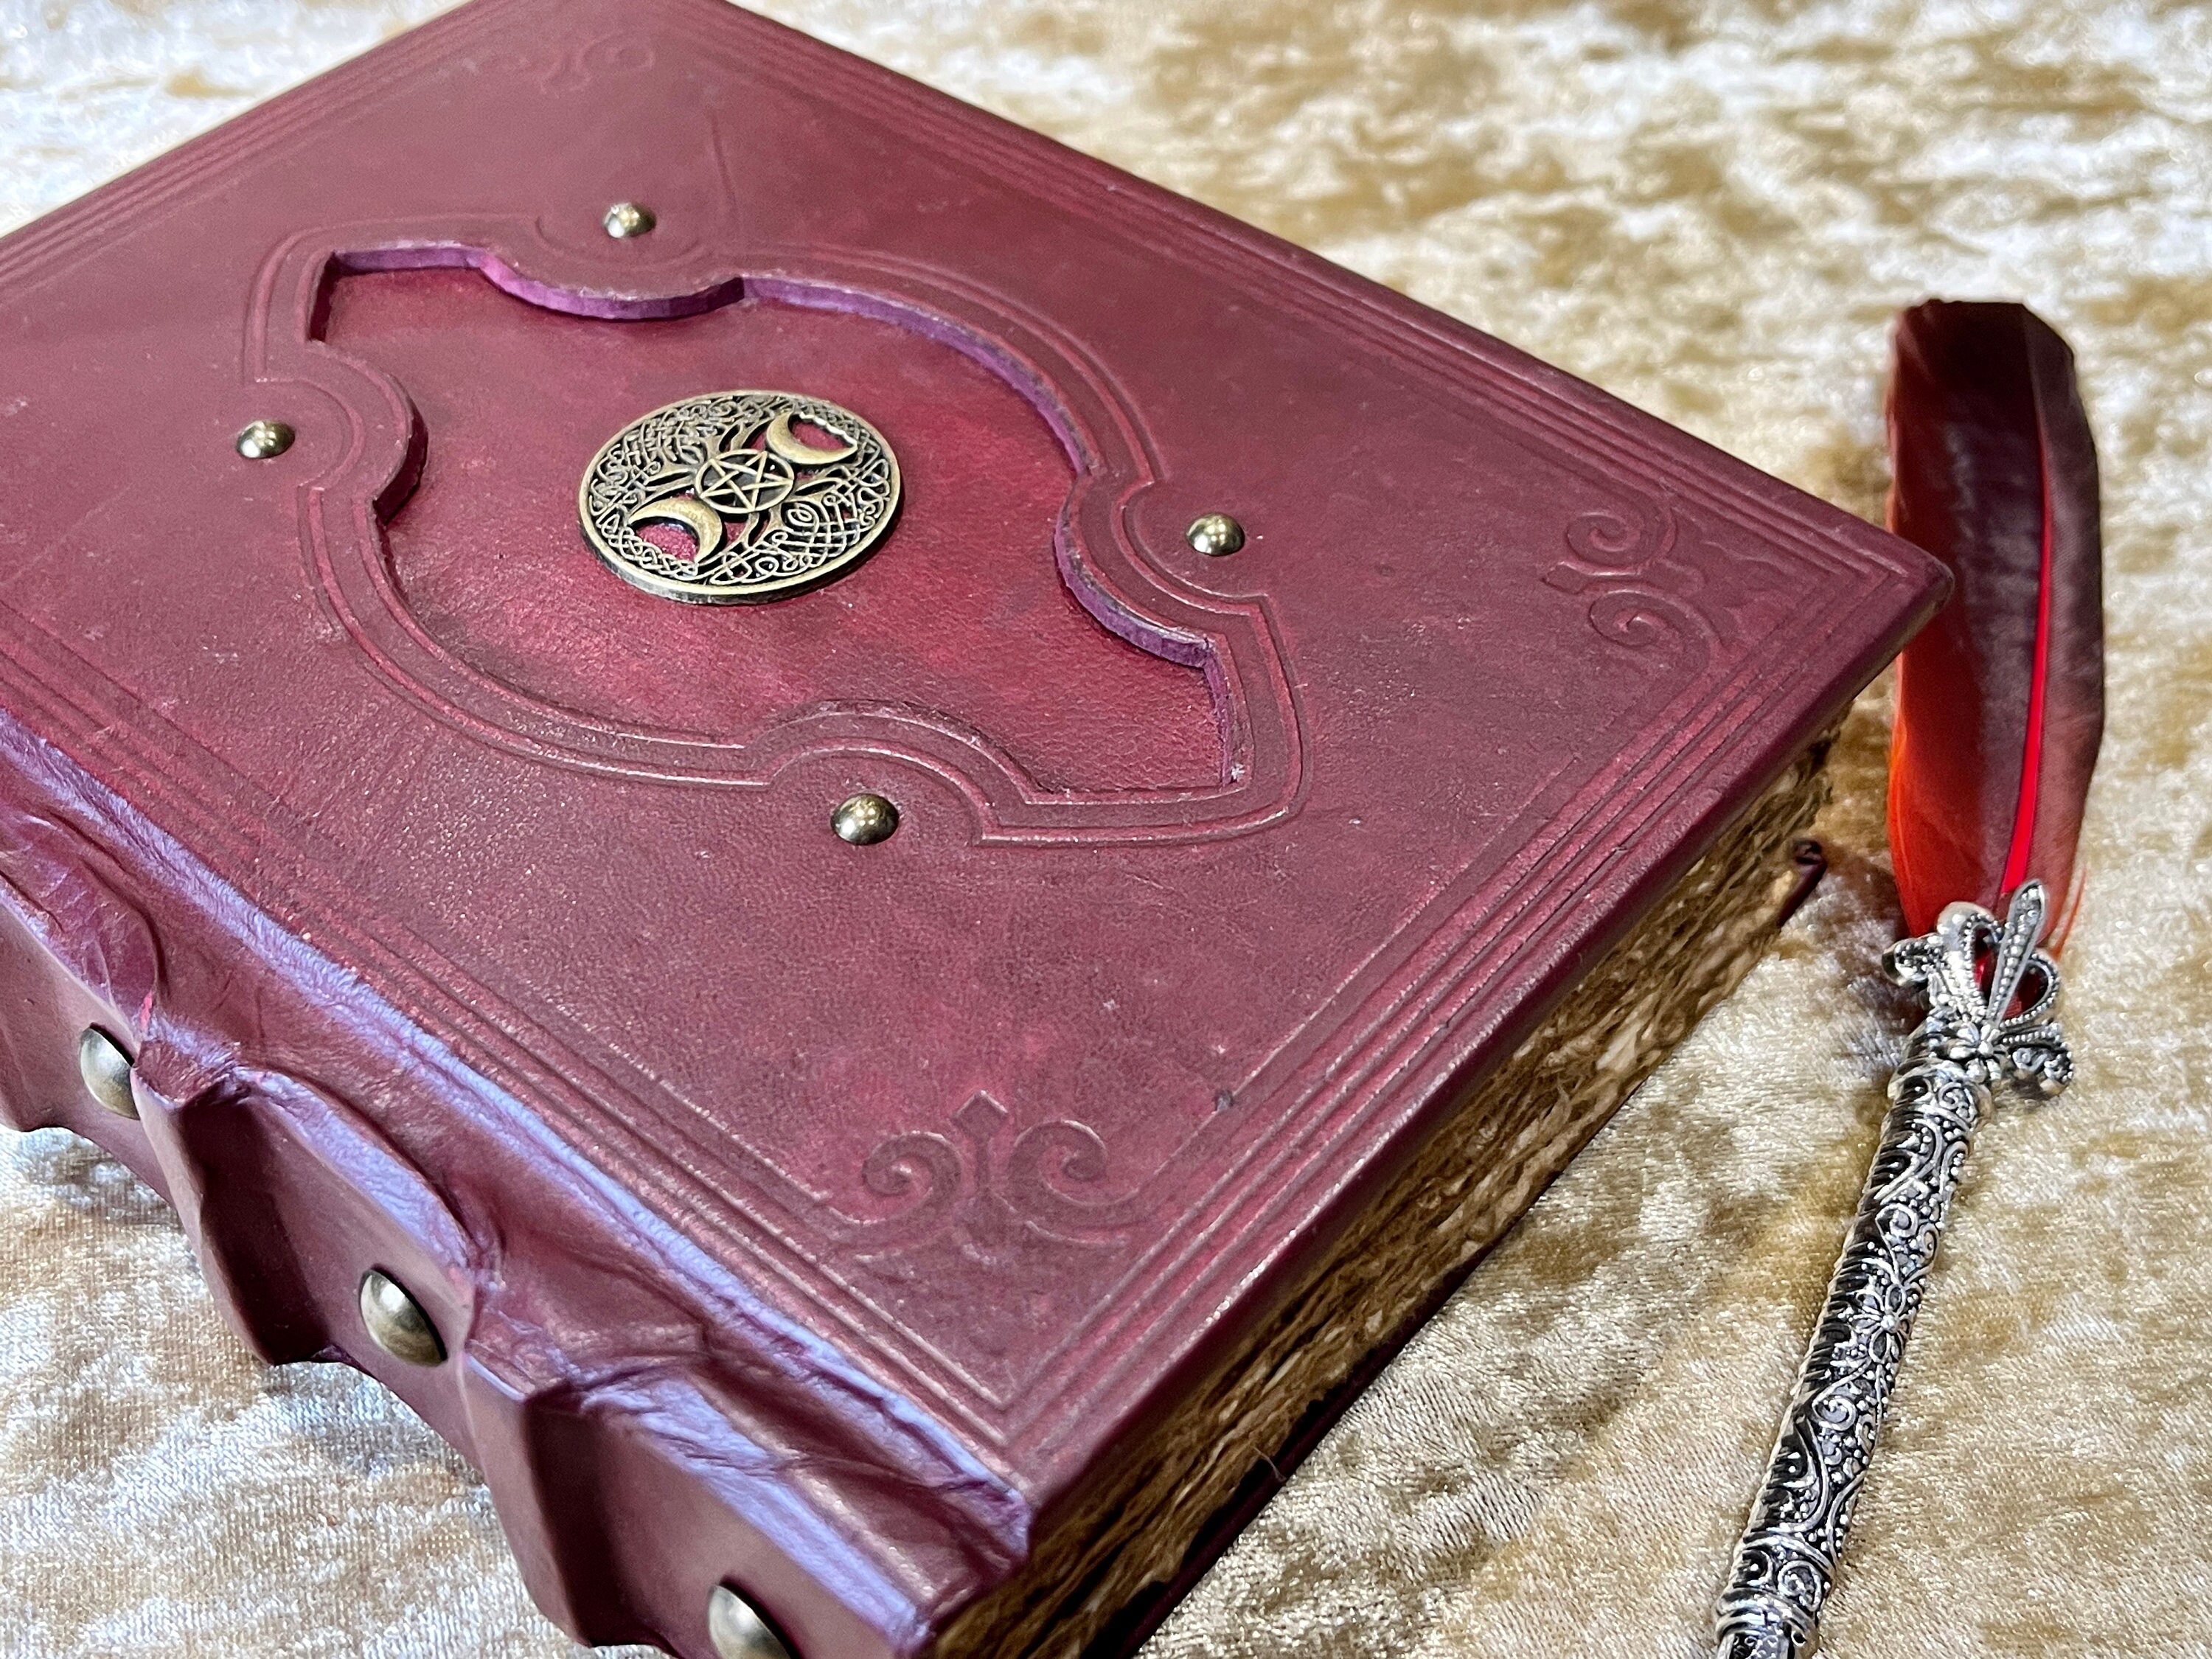 Fantasy Hardcover Spellbook Grimoire with a Celtic Dragon Cover and de –